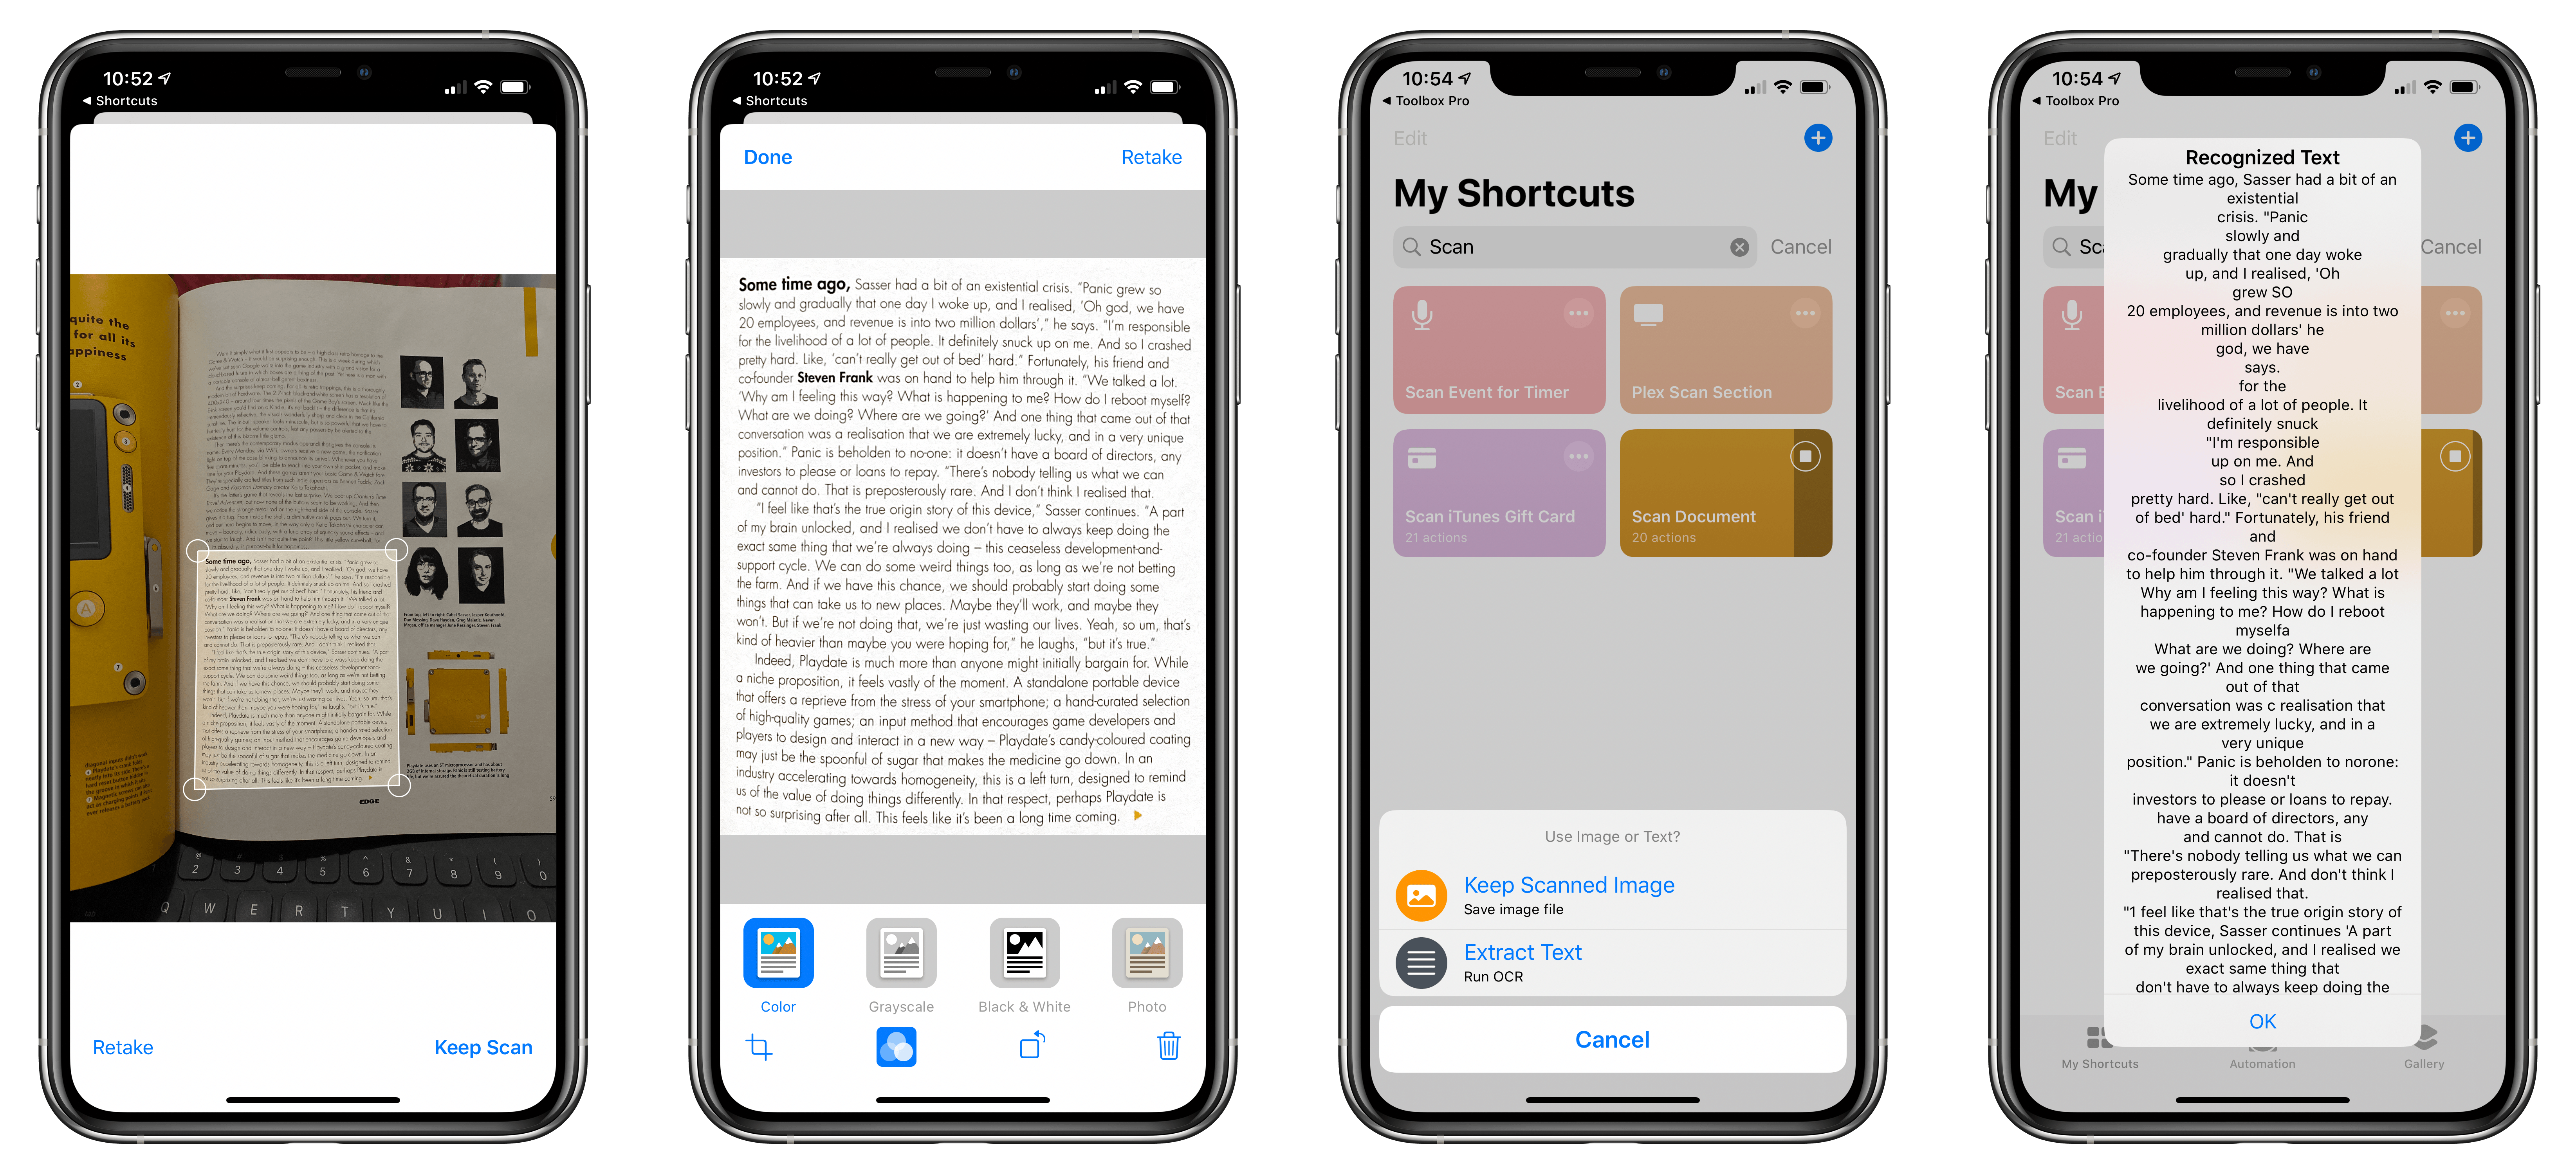 Scanning documents with Shortcuts and Apple's native OCR via Toolbox Pro. Apple's OCR feature isn't perfect, but it's free, fast, and good enough.